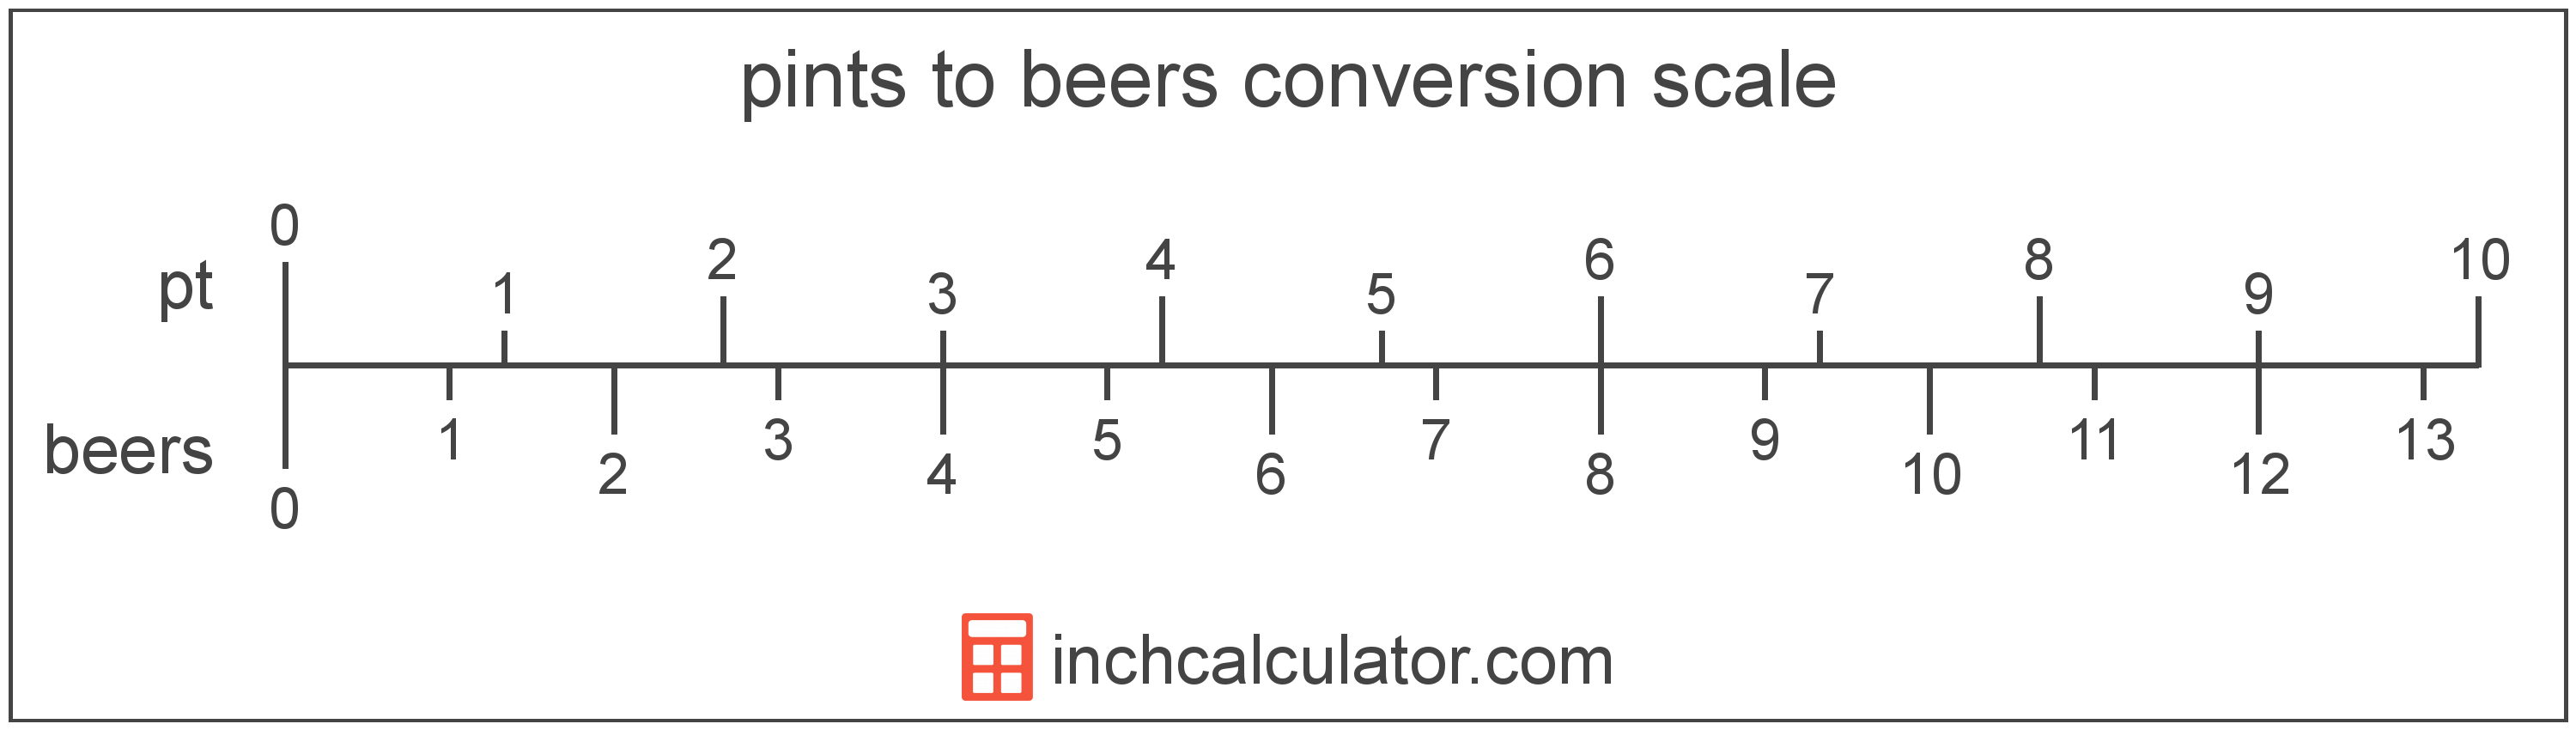 beers-to-pints-conversion-inch-calculator